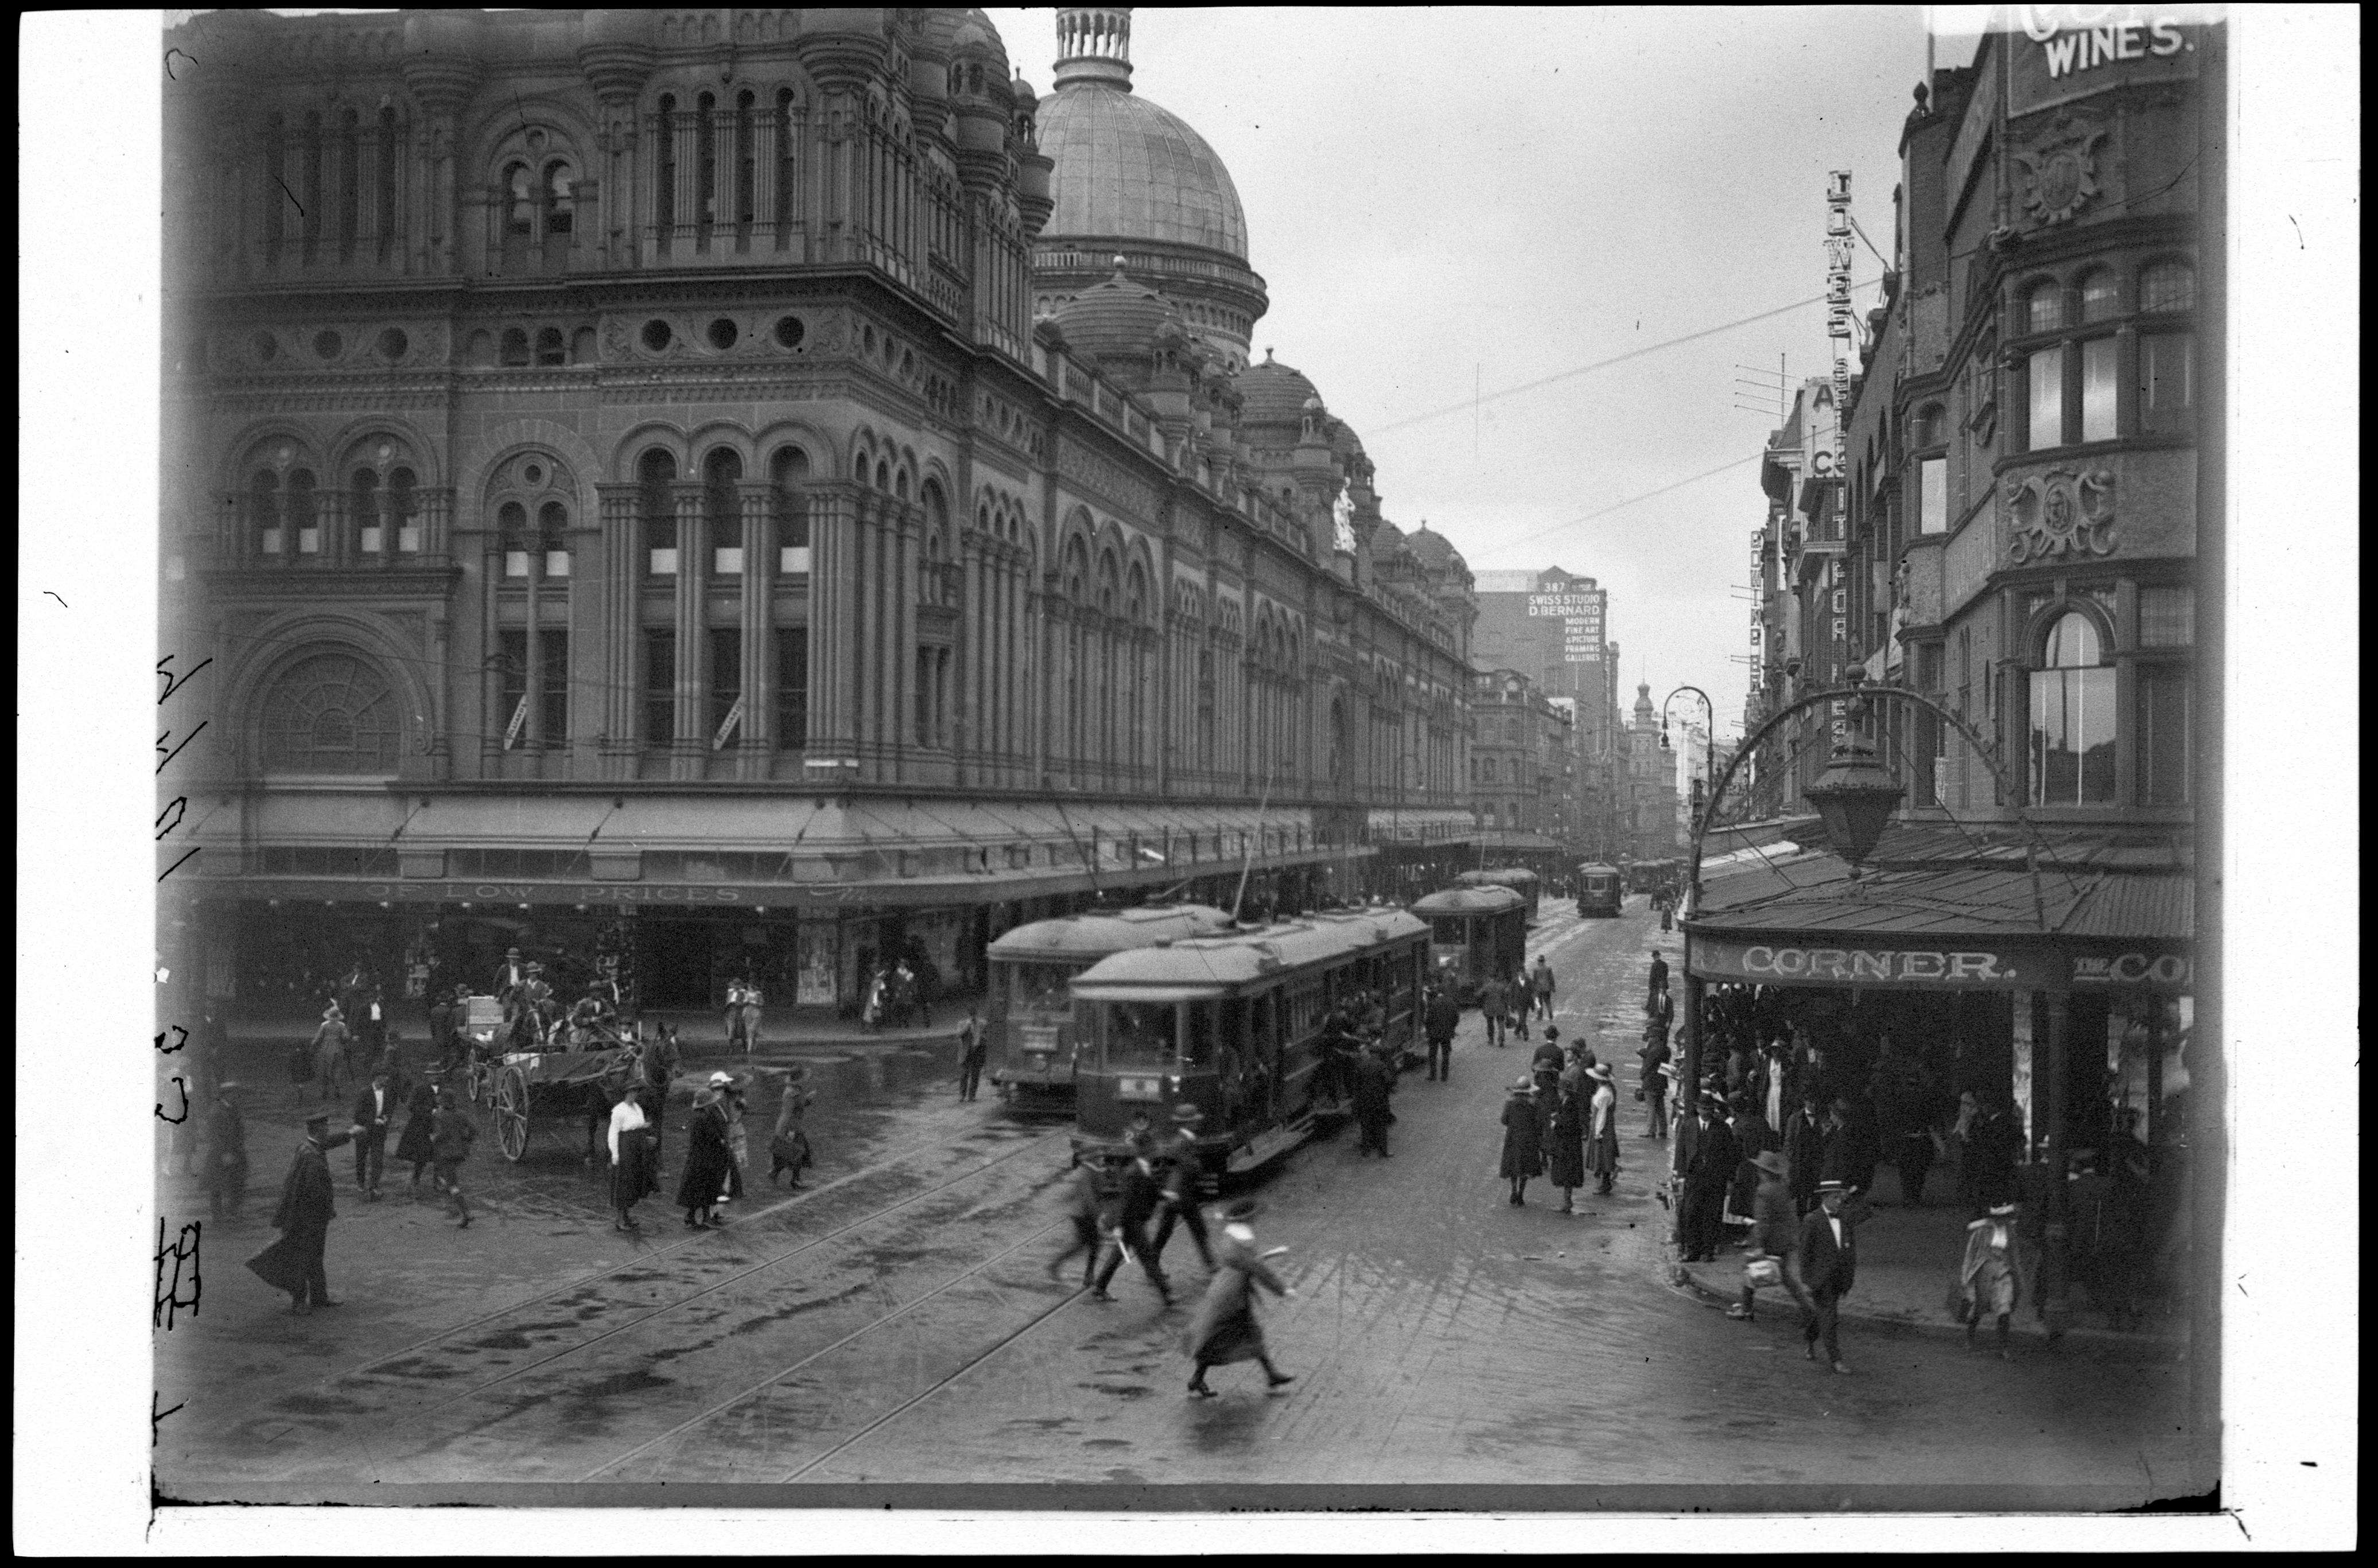 Queen Victoria Buildings, looking down George St, n.d. / unknown photographer